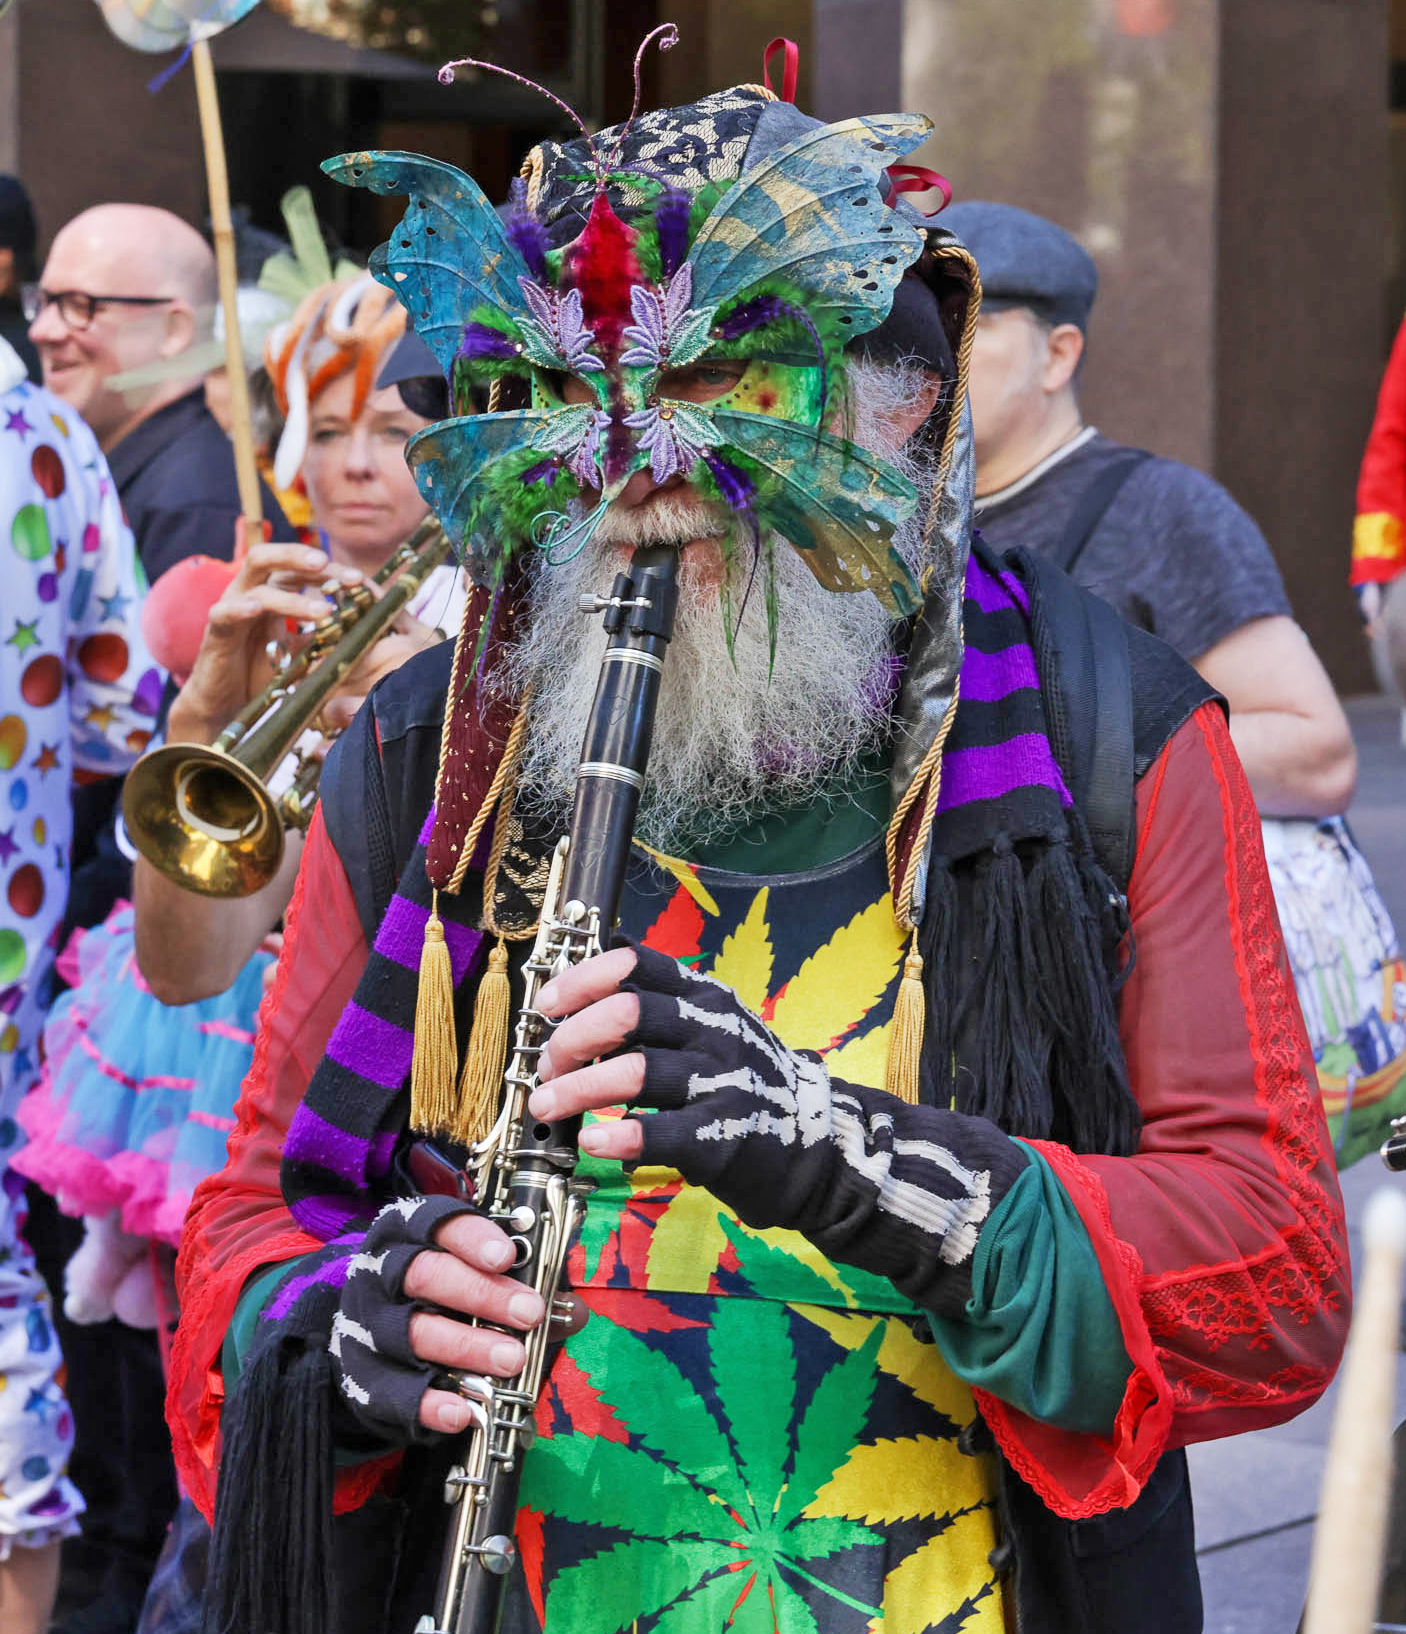 A person in a vibrant butterfly mask and colorful attire plays the clarinet in a street parade.